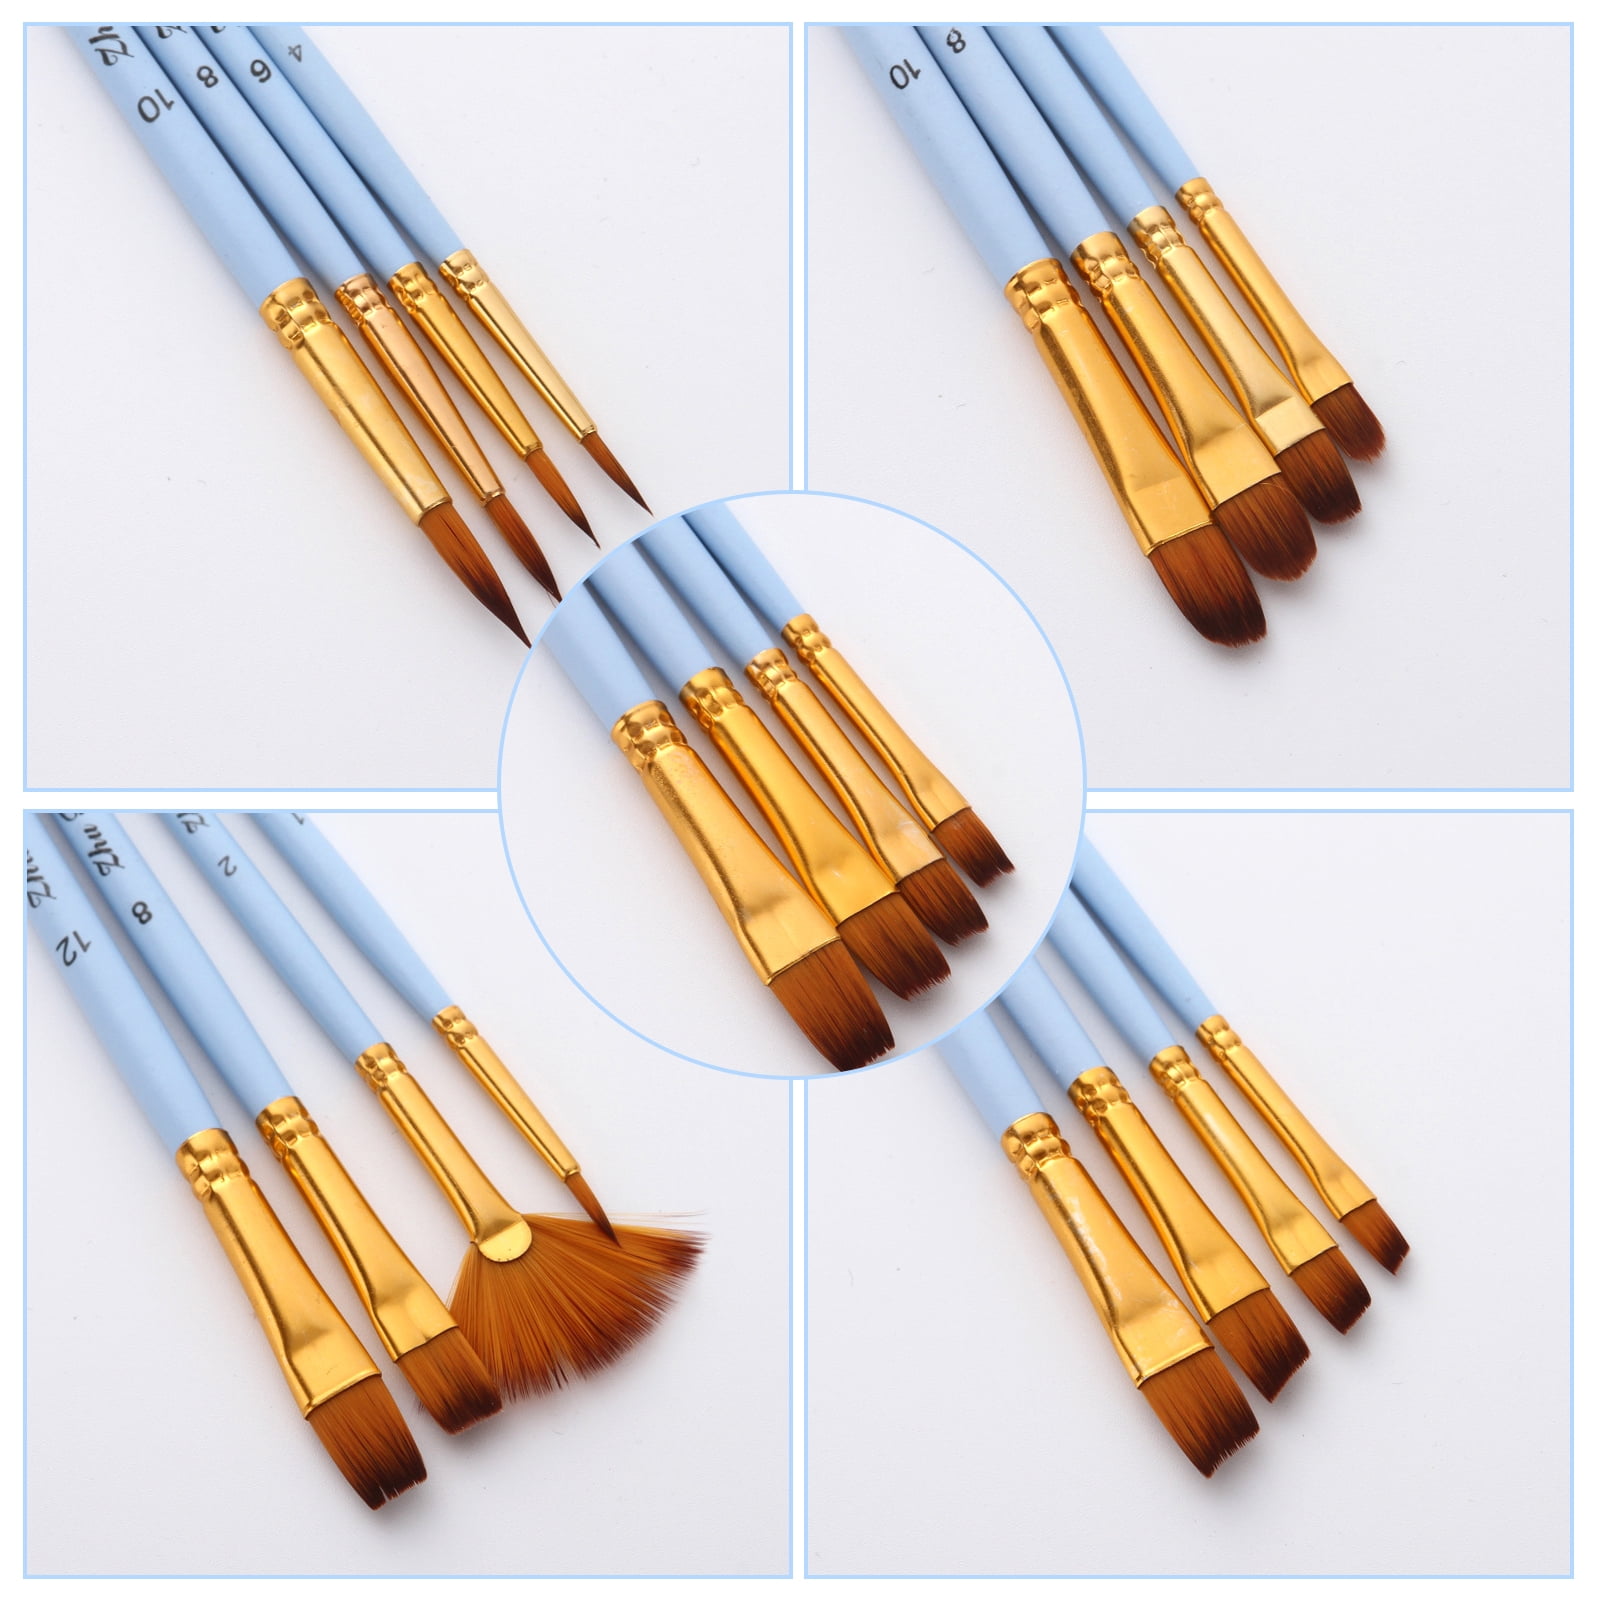 KissDate Paint Brushes, 20 Pcs Face Paint Brushes for Children Watercolor,  Acrylic Gouache and Oil Painting Suitable for Decorations, Models,  Figurines, Nail Art 